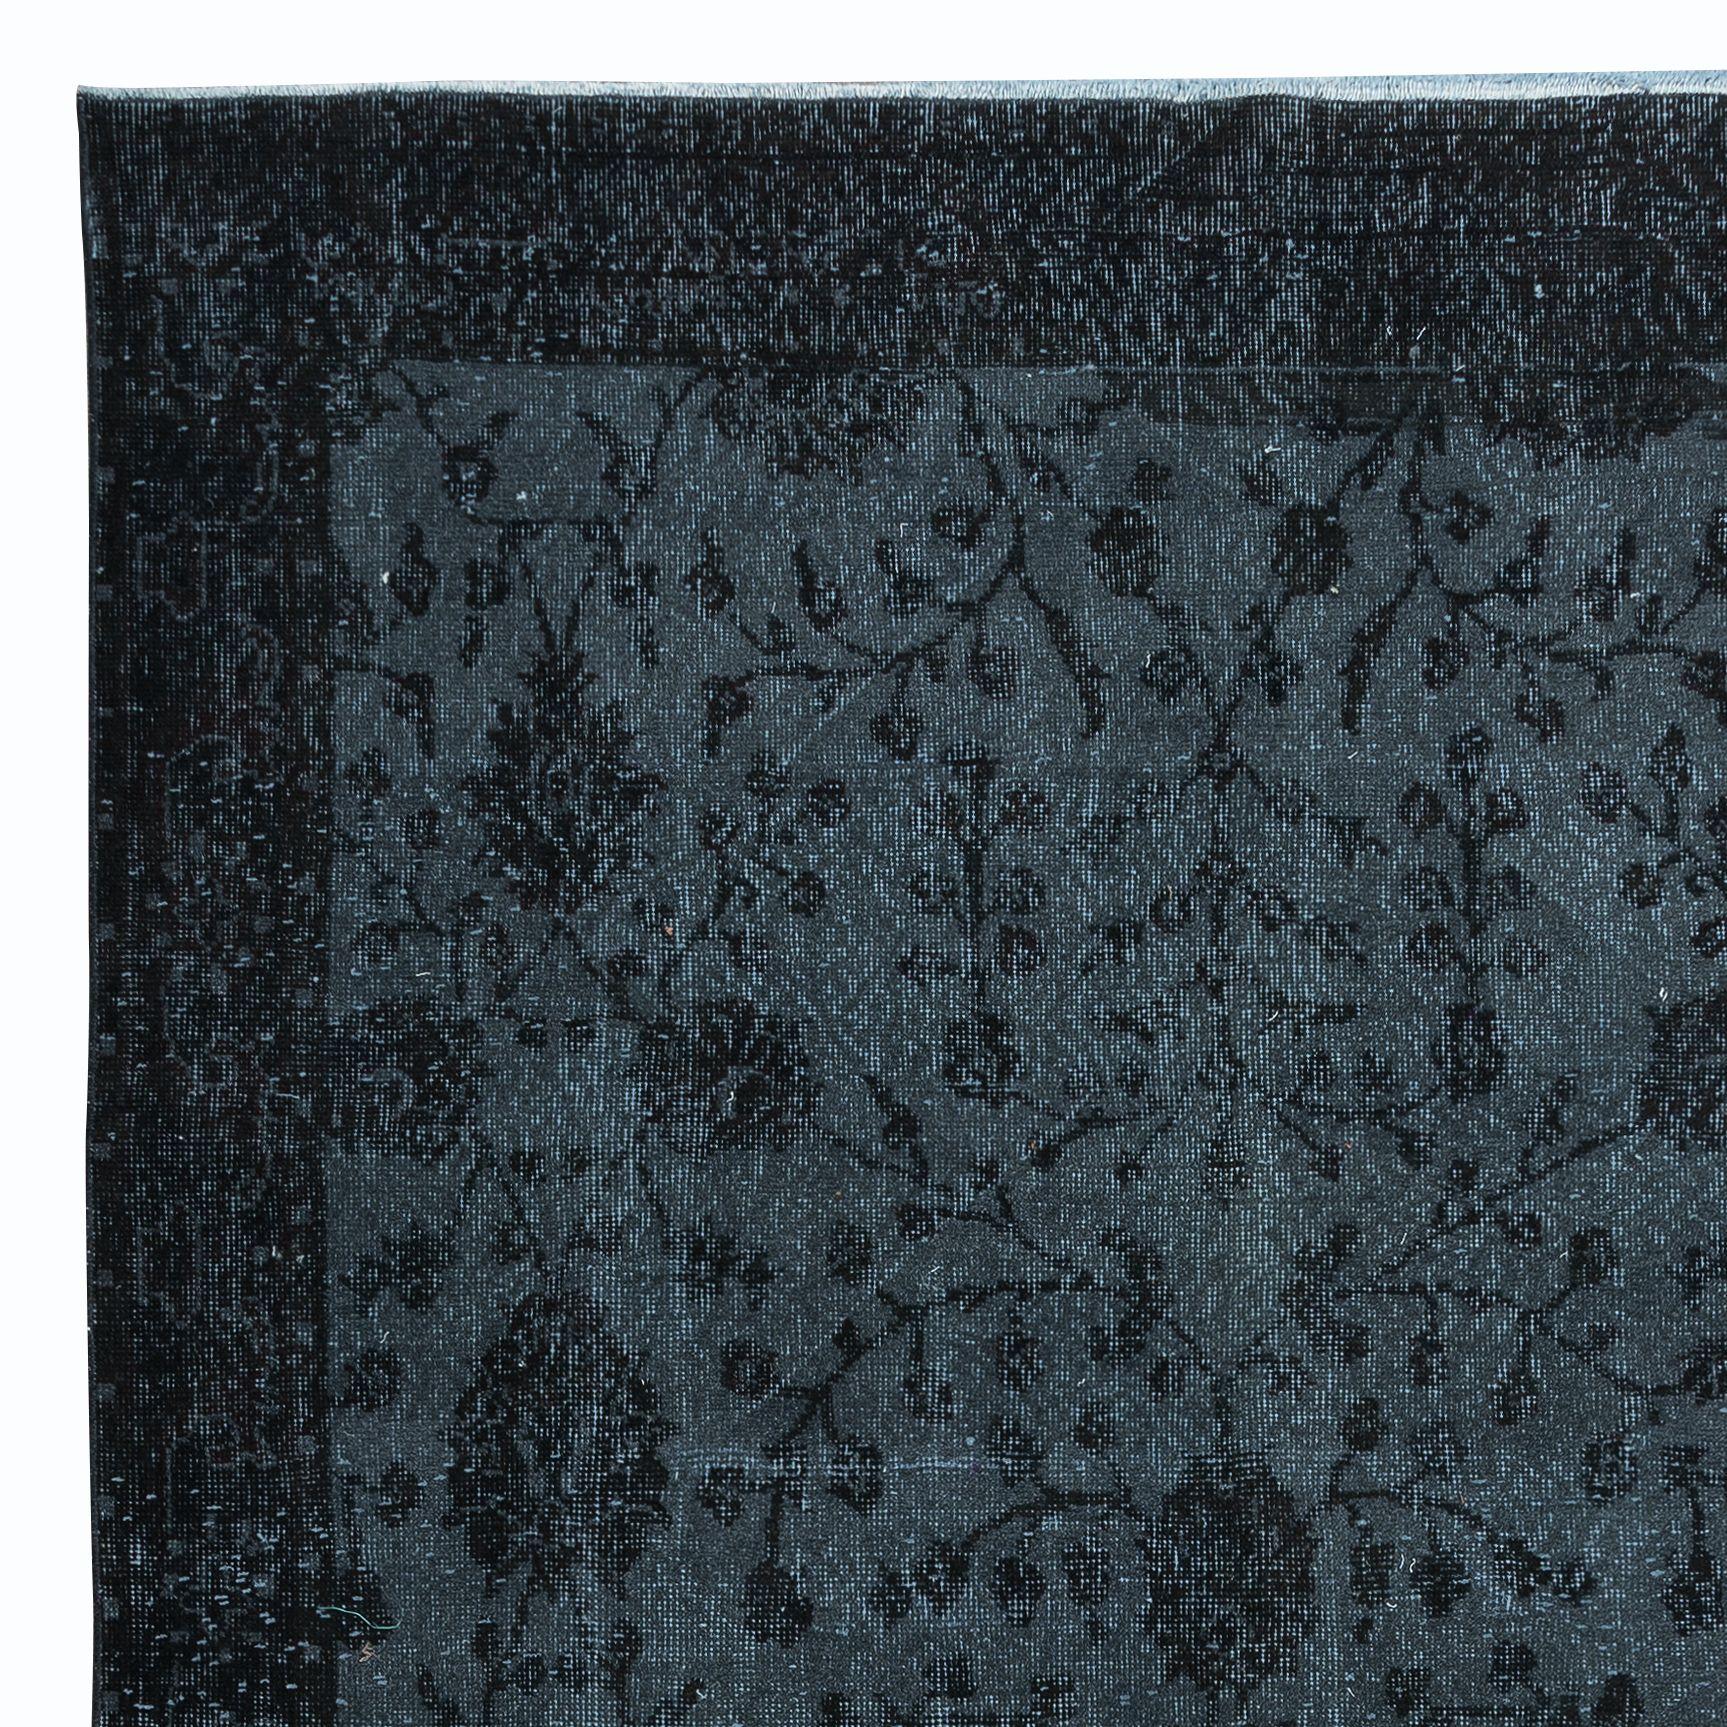 Hand-Woven 5.5x9.8 Ft Black Wool Area Rug for Modern Interiors, Hand-Knotted in Turkey For Sale